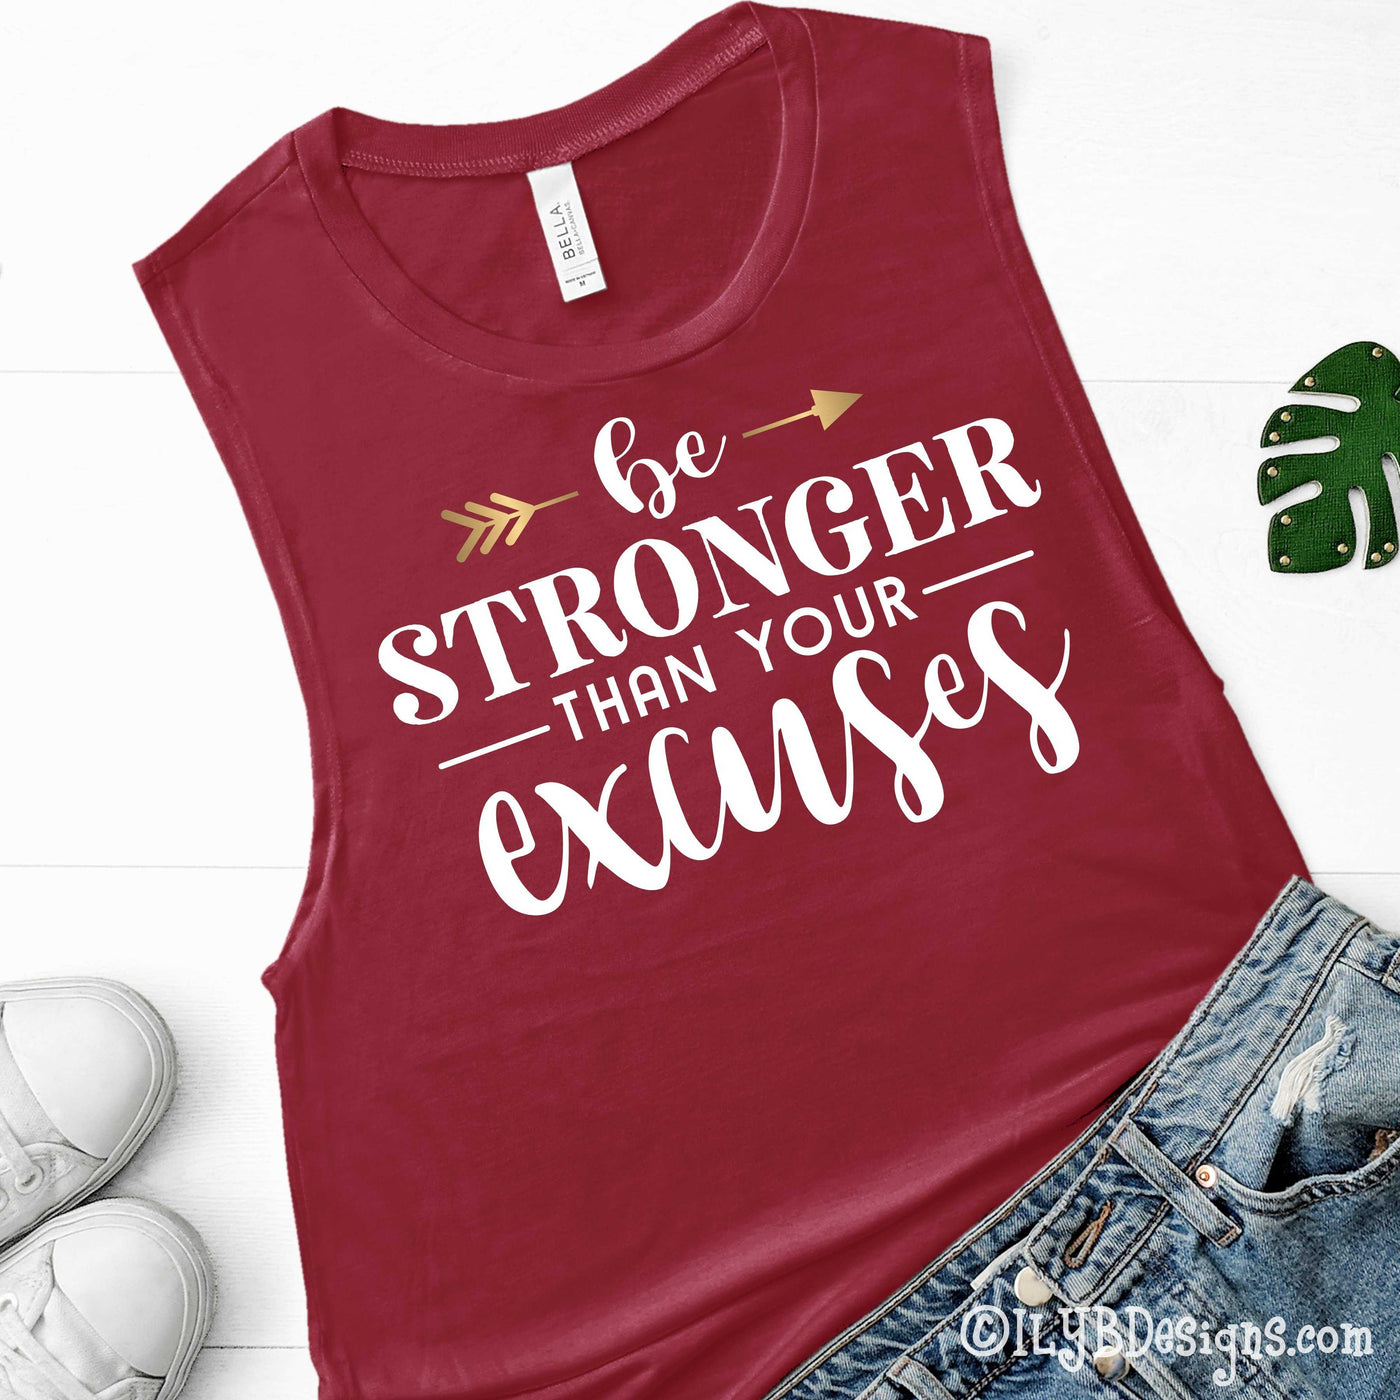 Be Stronger Than Your Excuses Workout Tank - Women's Funny Workout Tanks - Muscle Tank - ILYB Designs